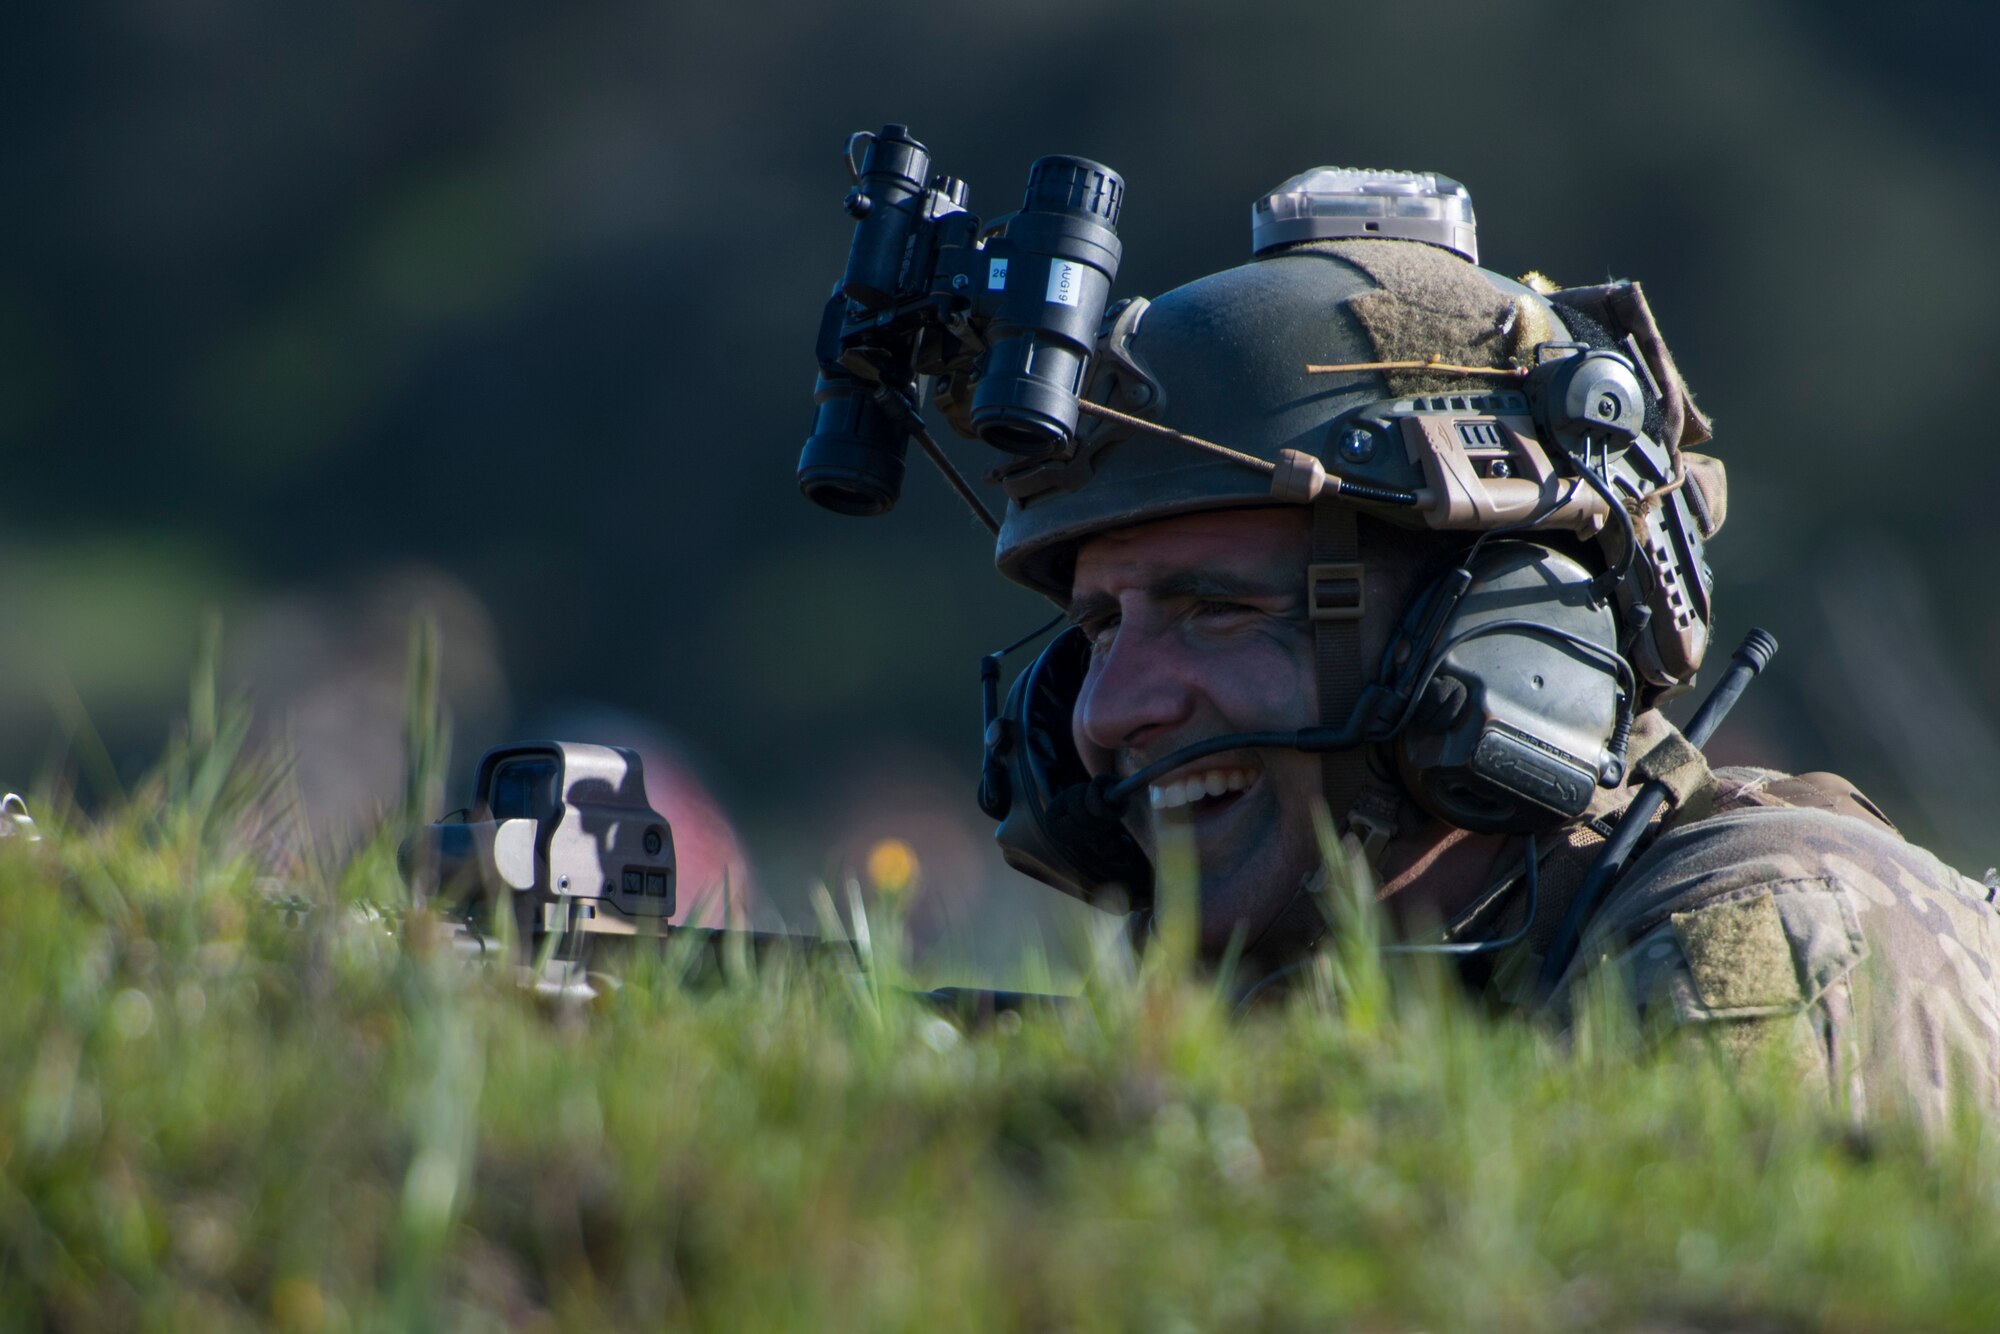 A pararescueman 58th Rescue Squadron, Nellis Air Force Base, Nev., laughs during Tiger Rescue IV, March 28, 2018, at Vandenberg Air Force Base, Calif. The four-day exercise challenged Airmen from multiple rescue squadrons to bring the capabilities of the personnel recovery triad together to successfully complete rescue missions and maintain proficiency. The three branches of the personnel recovery triad are the HC-130J Combat King II, HH-60G Pave Hawk and the guardian angel weapons system or pararescuemen. (U.S. Air Force photo by Senior Airman Janiqua P. Robinson)